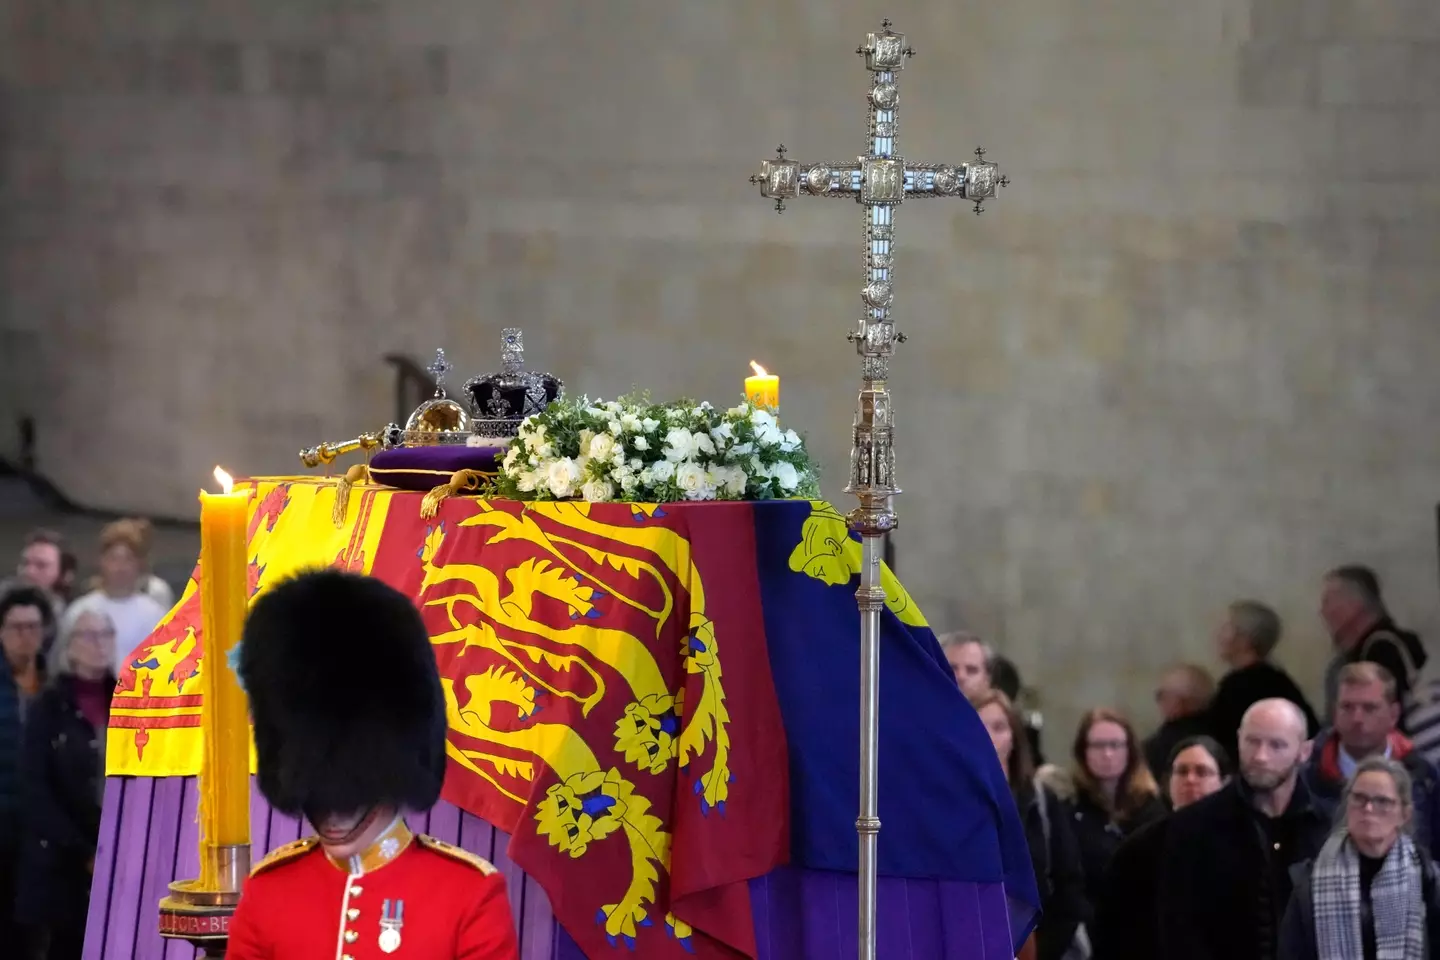 The coffin was draped in the Royal Standard with the Imperial State Crown and the Sovereign's orb and sceptre.